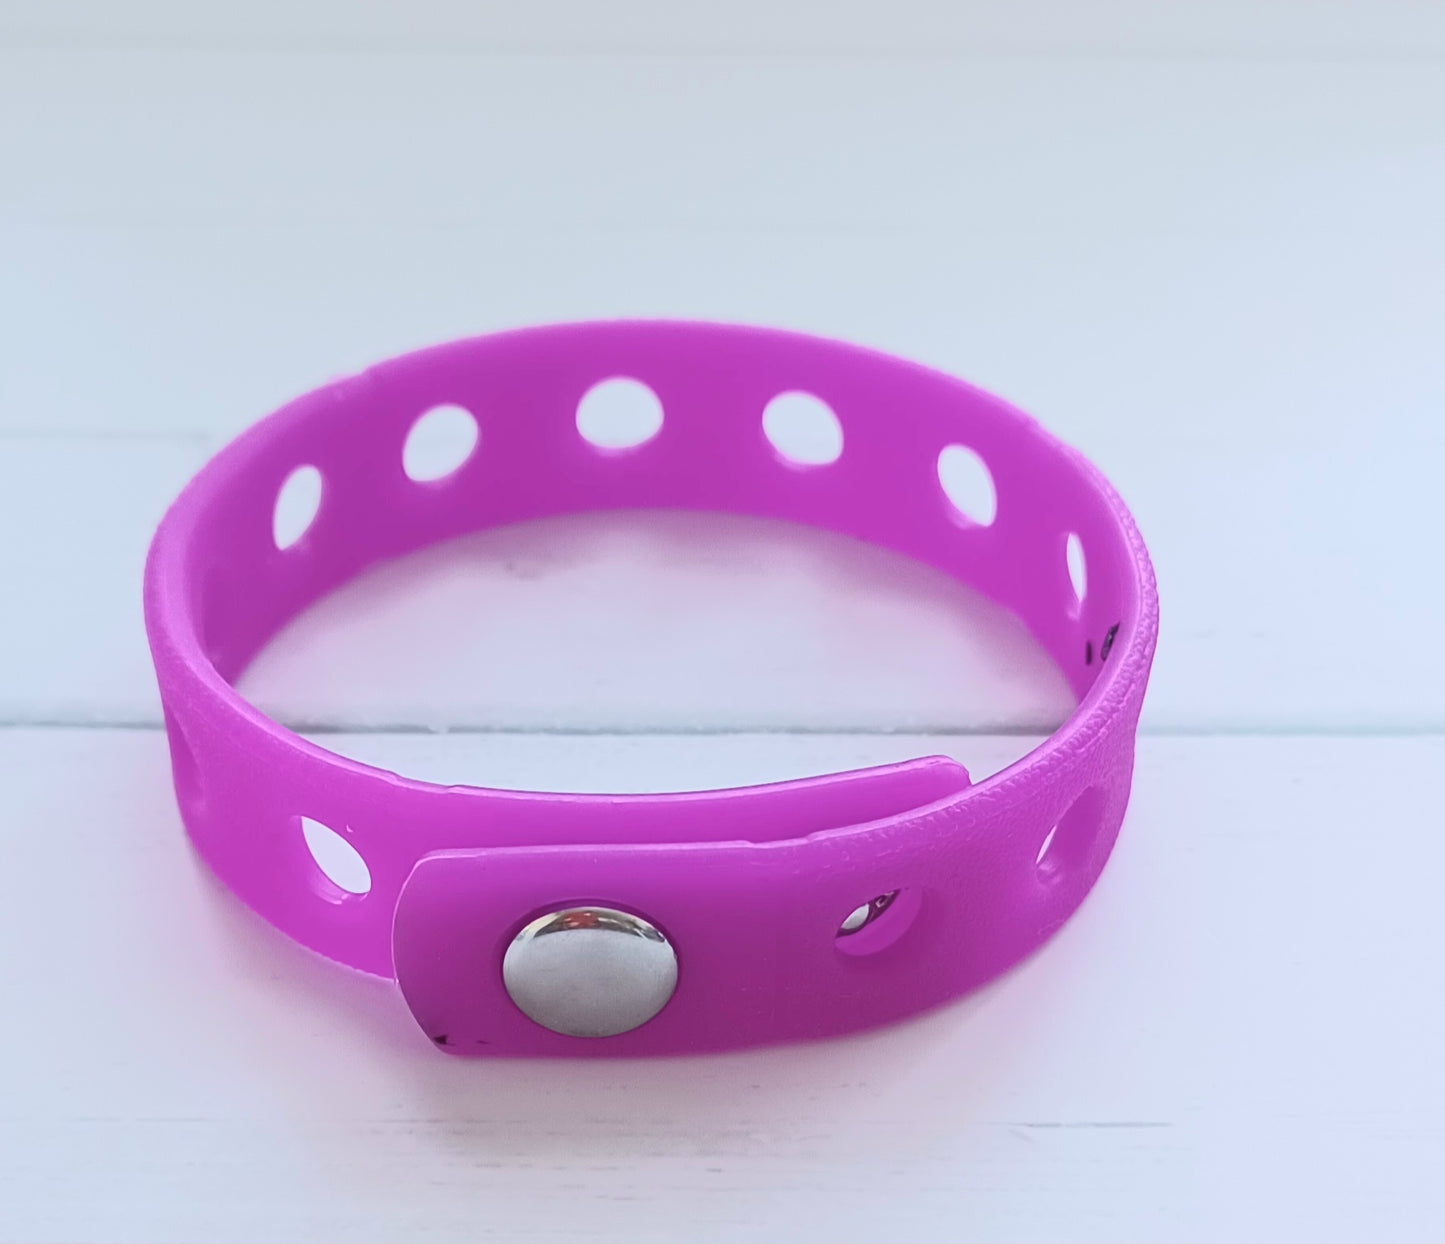 Colorful Kids/Teens Adjustable Silicone Croc Charms Wristbands/Bracelets 12 Colors 7 inches